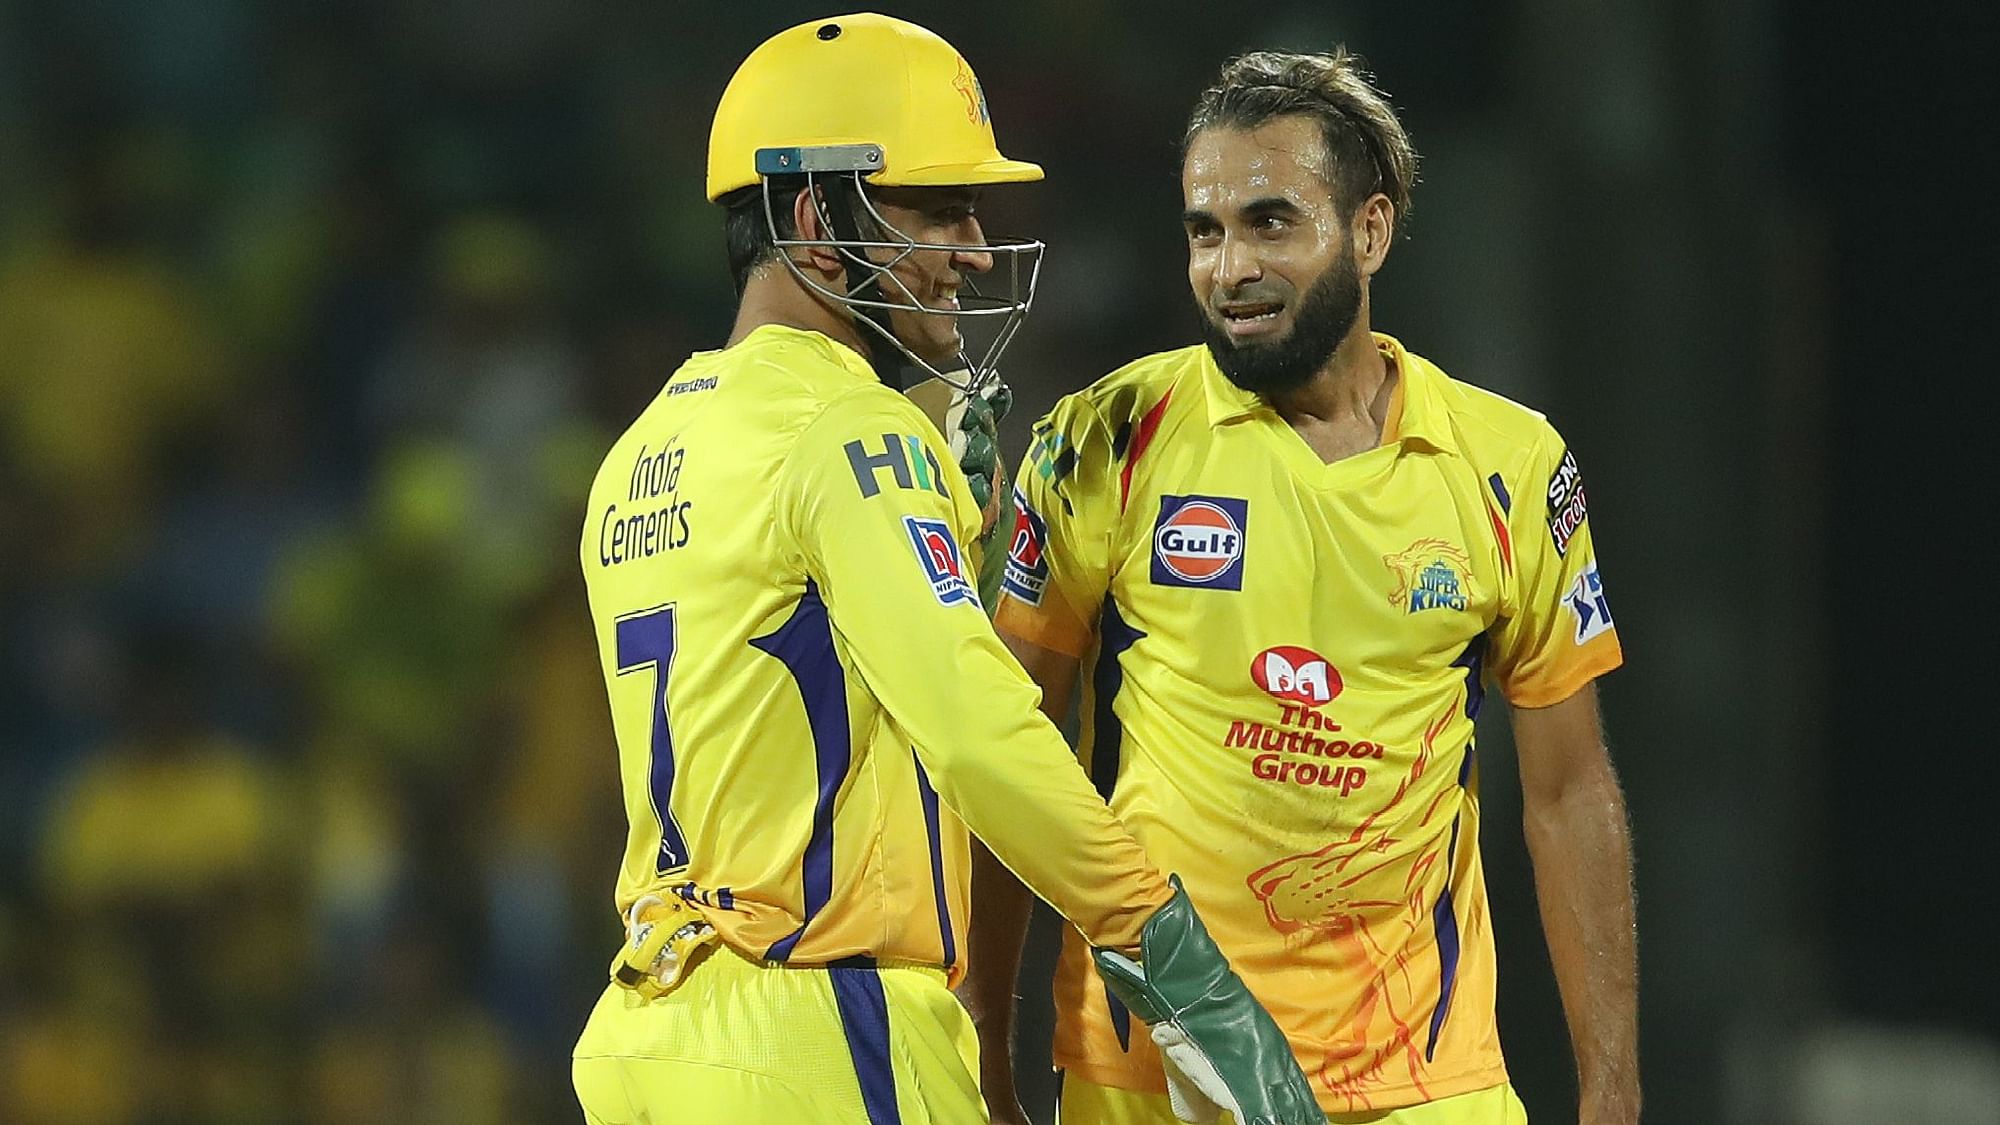 MS Dhoni picked Imran Tahir for special praise, saying the South African is someone on whom he can depend no matter what the situation.